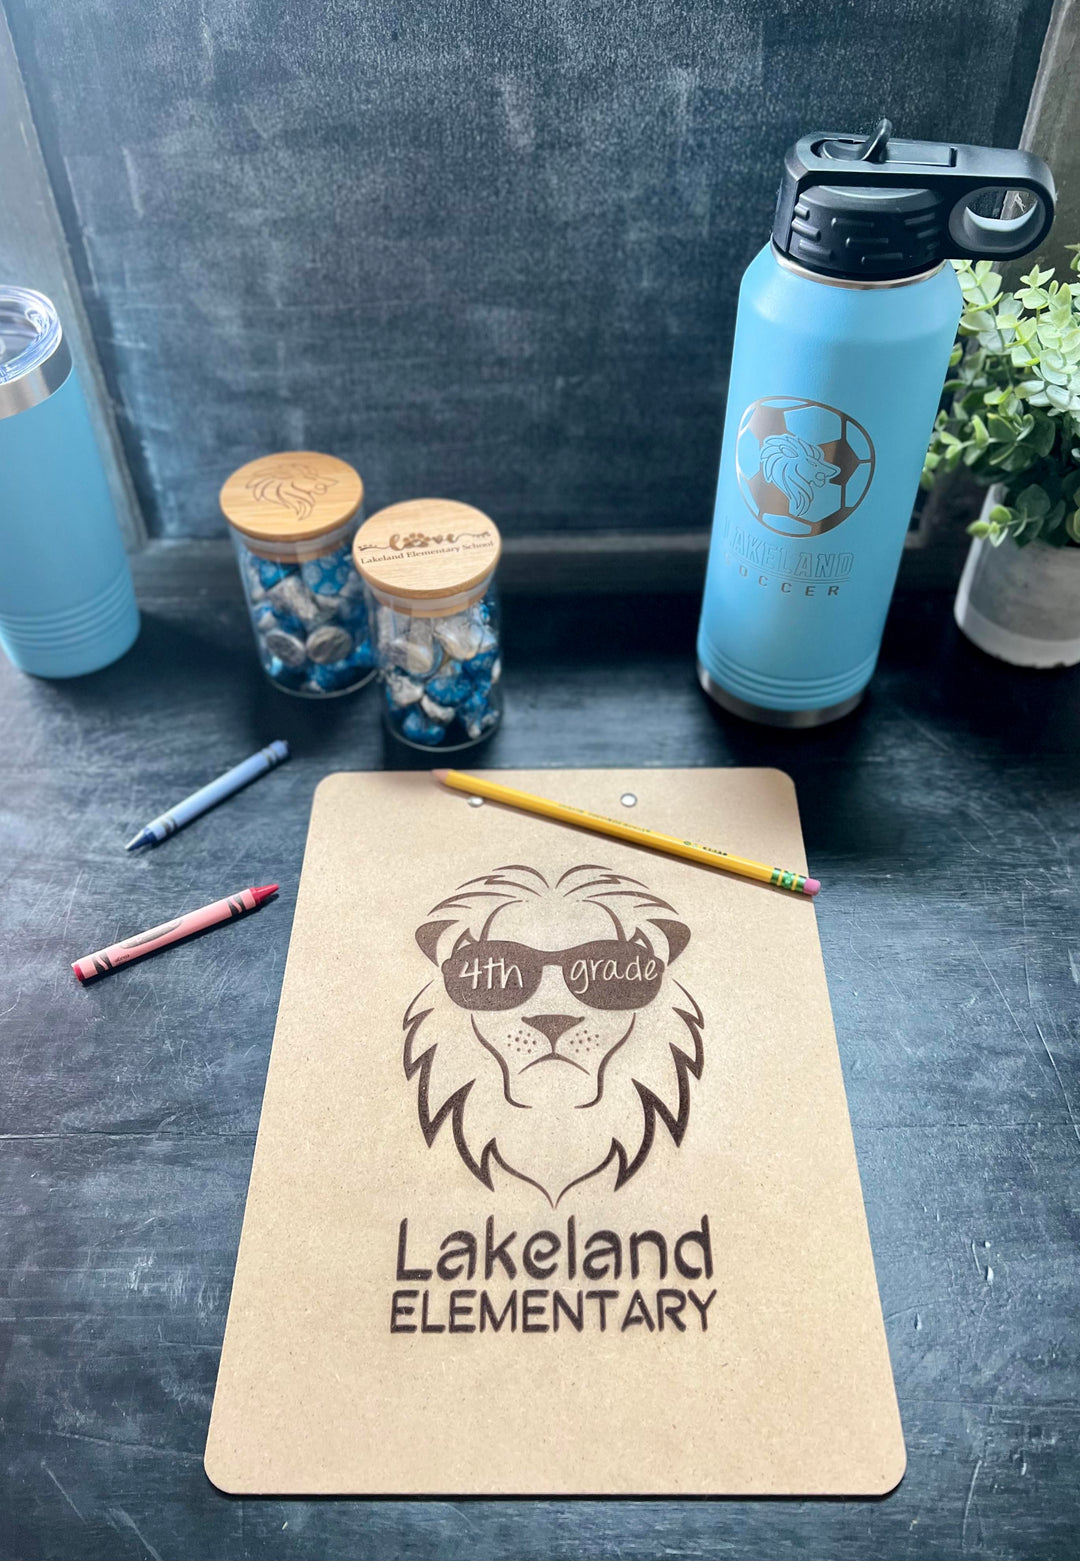 Personalized Teacher Gifts!